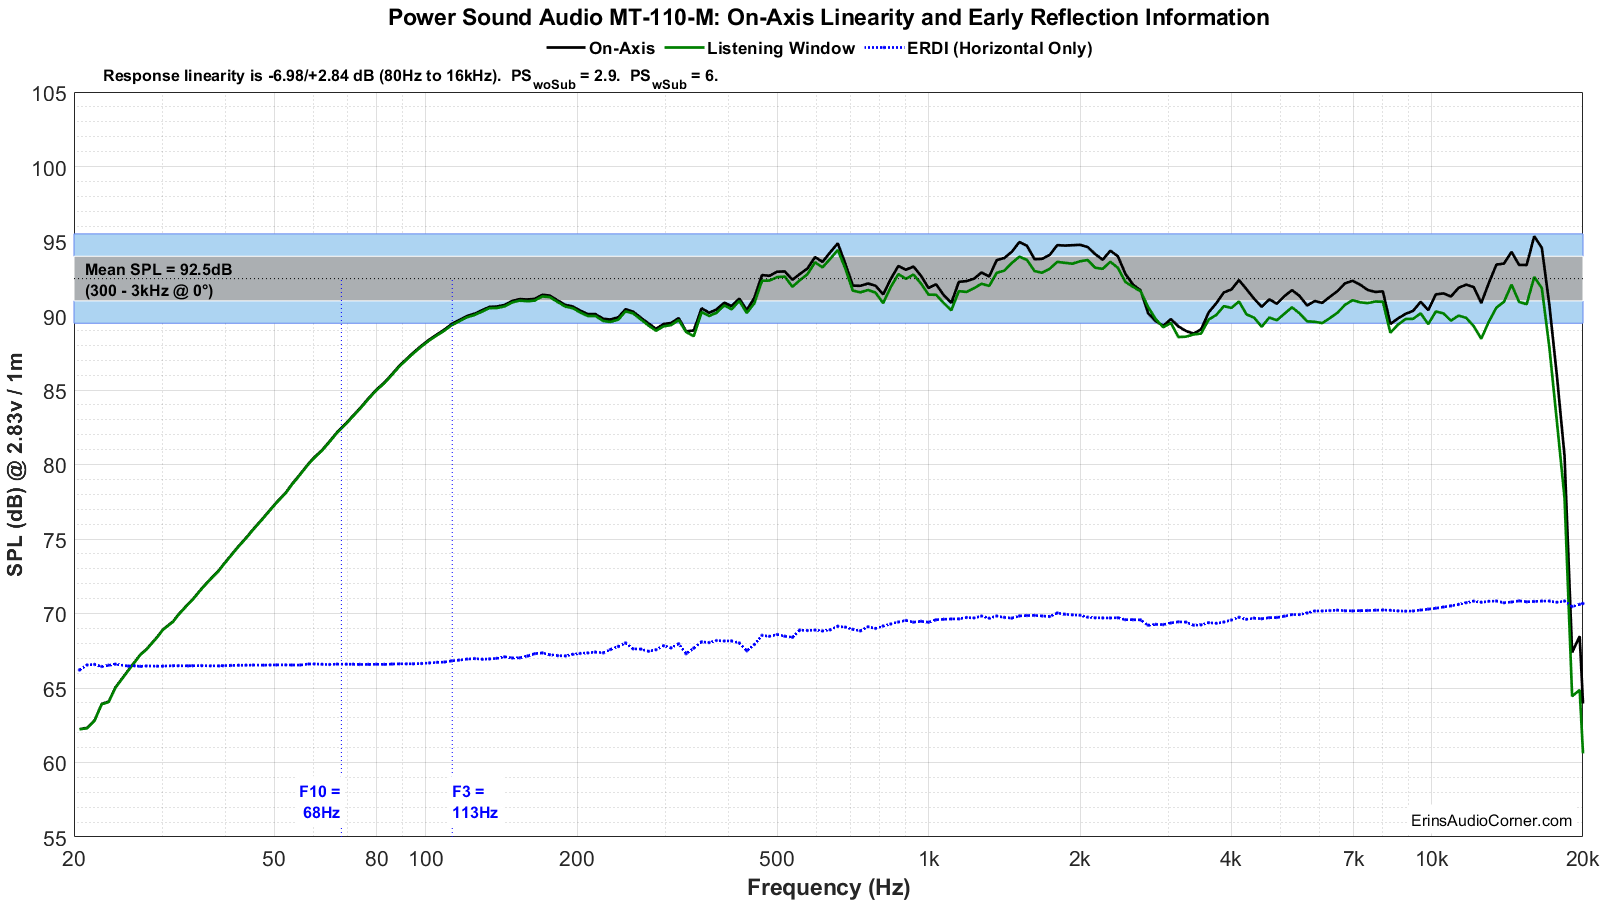 Power-Sound-Audio-MT-110-M-FR_Linearity.png